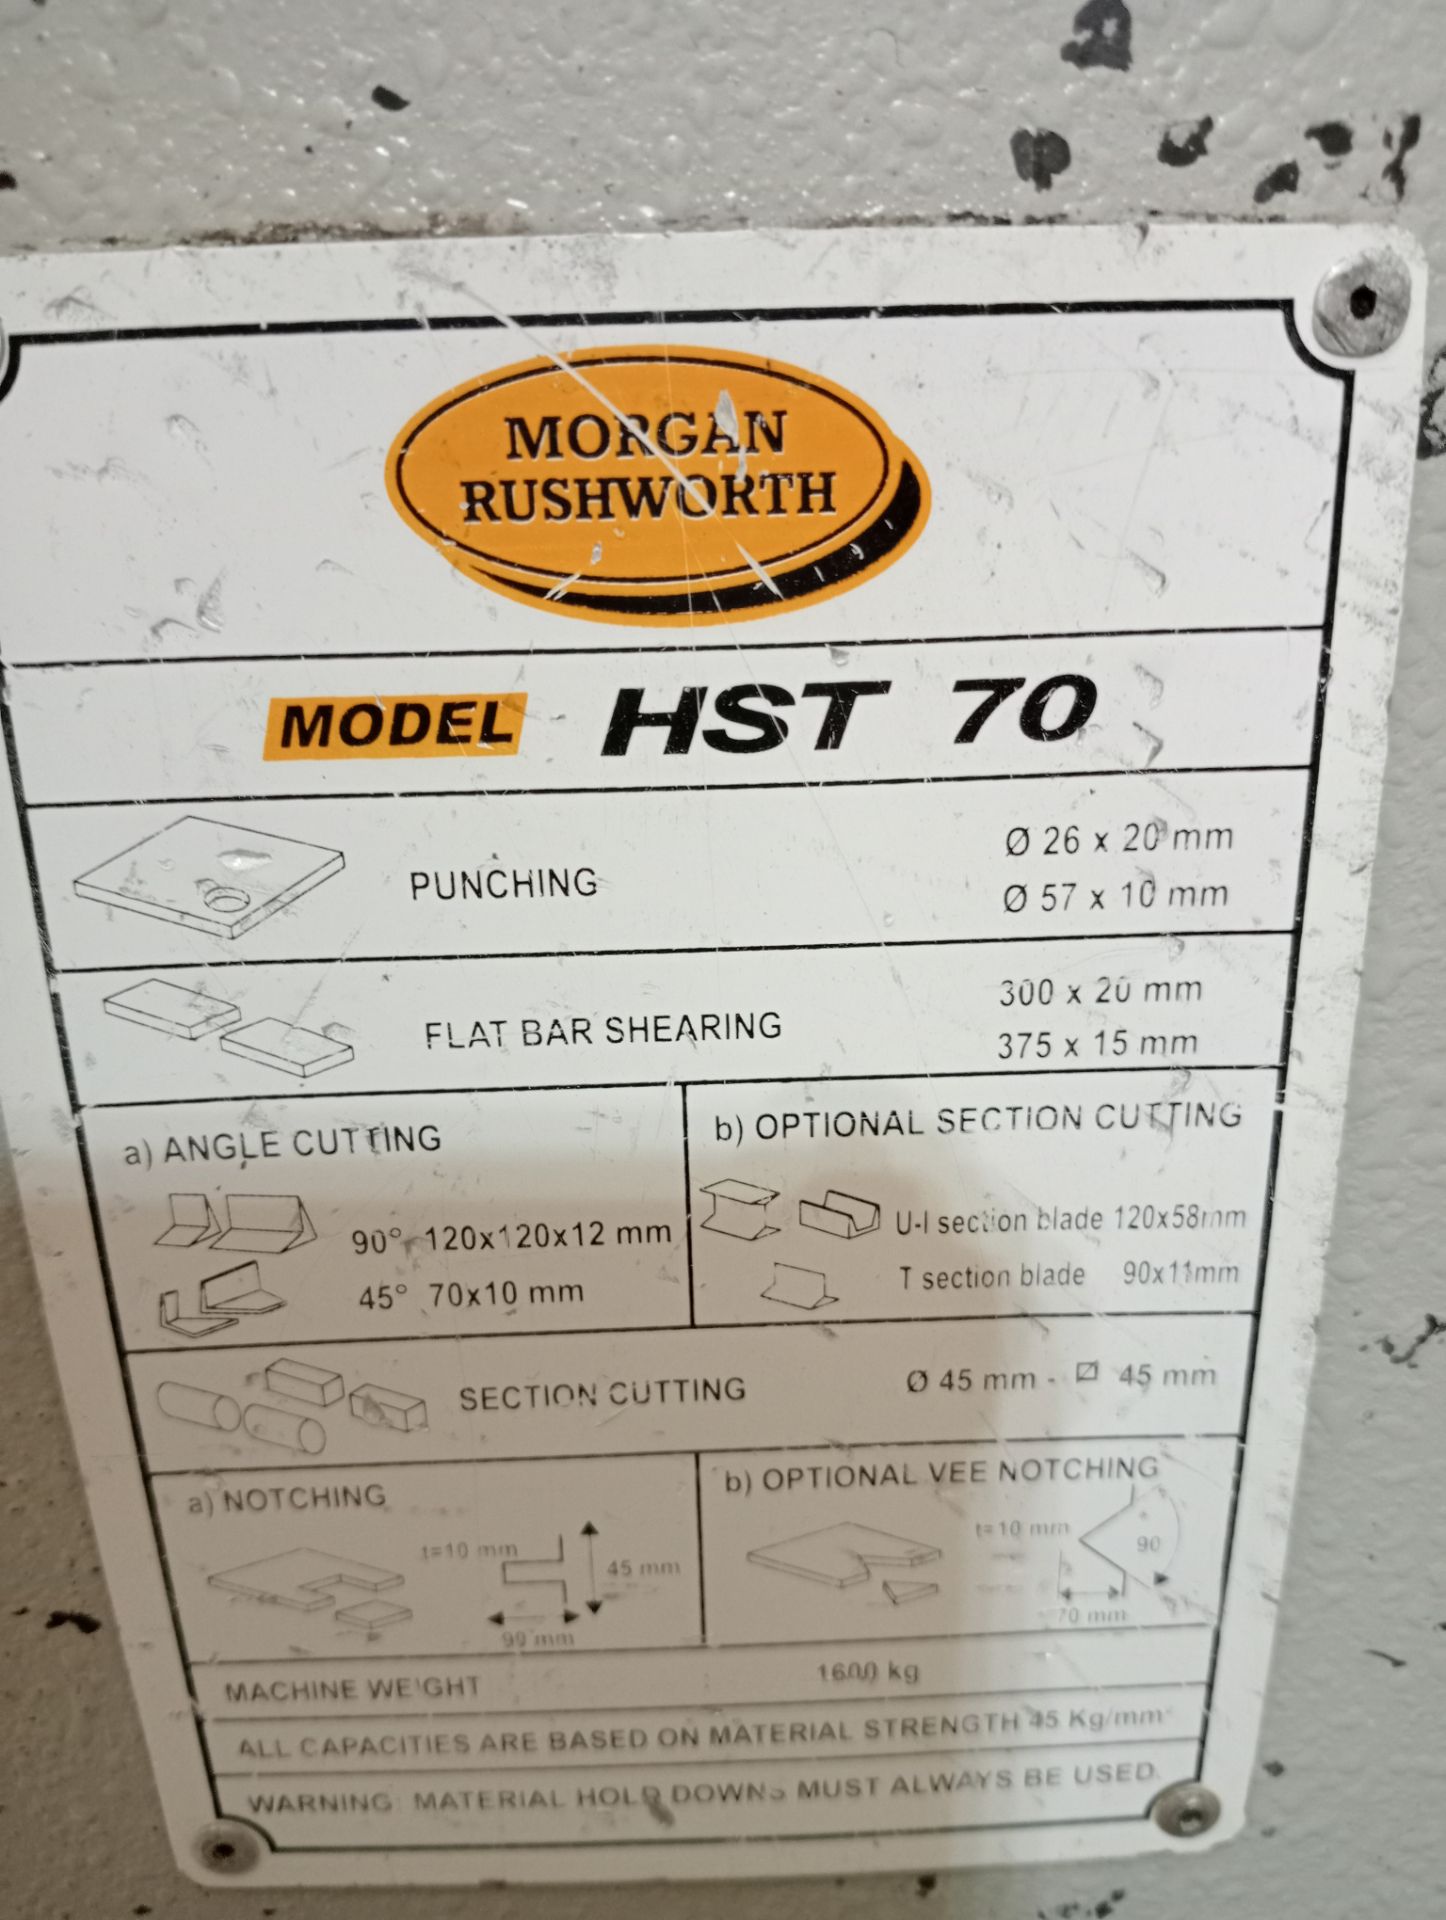 Morgan Rushman HST 70 Hydraulic Steelworker - specification in the pictures - Image 9 of 10